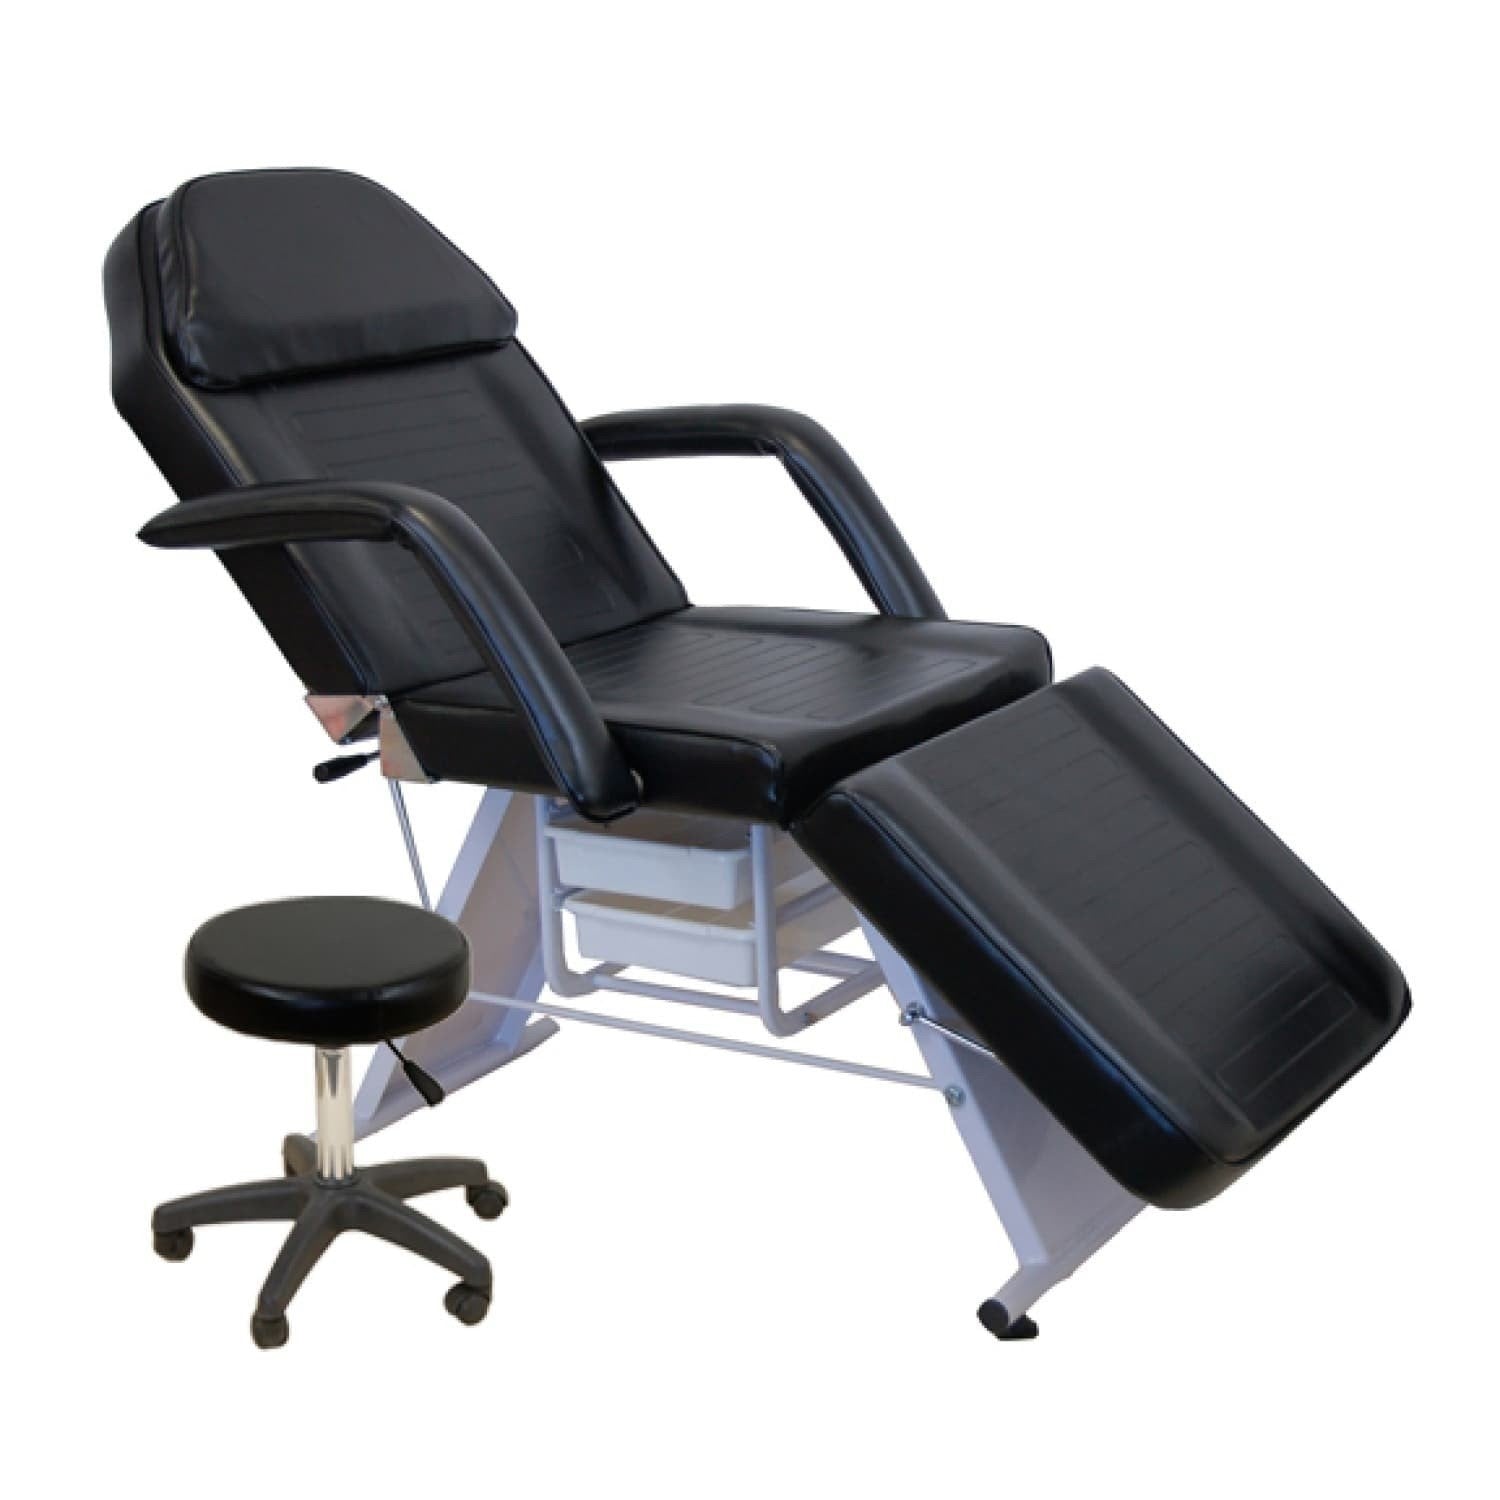 Dermalogic Dermalogic Parker Facial Bed & Stool Facial Chairs - ChairsThatGive